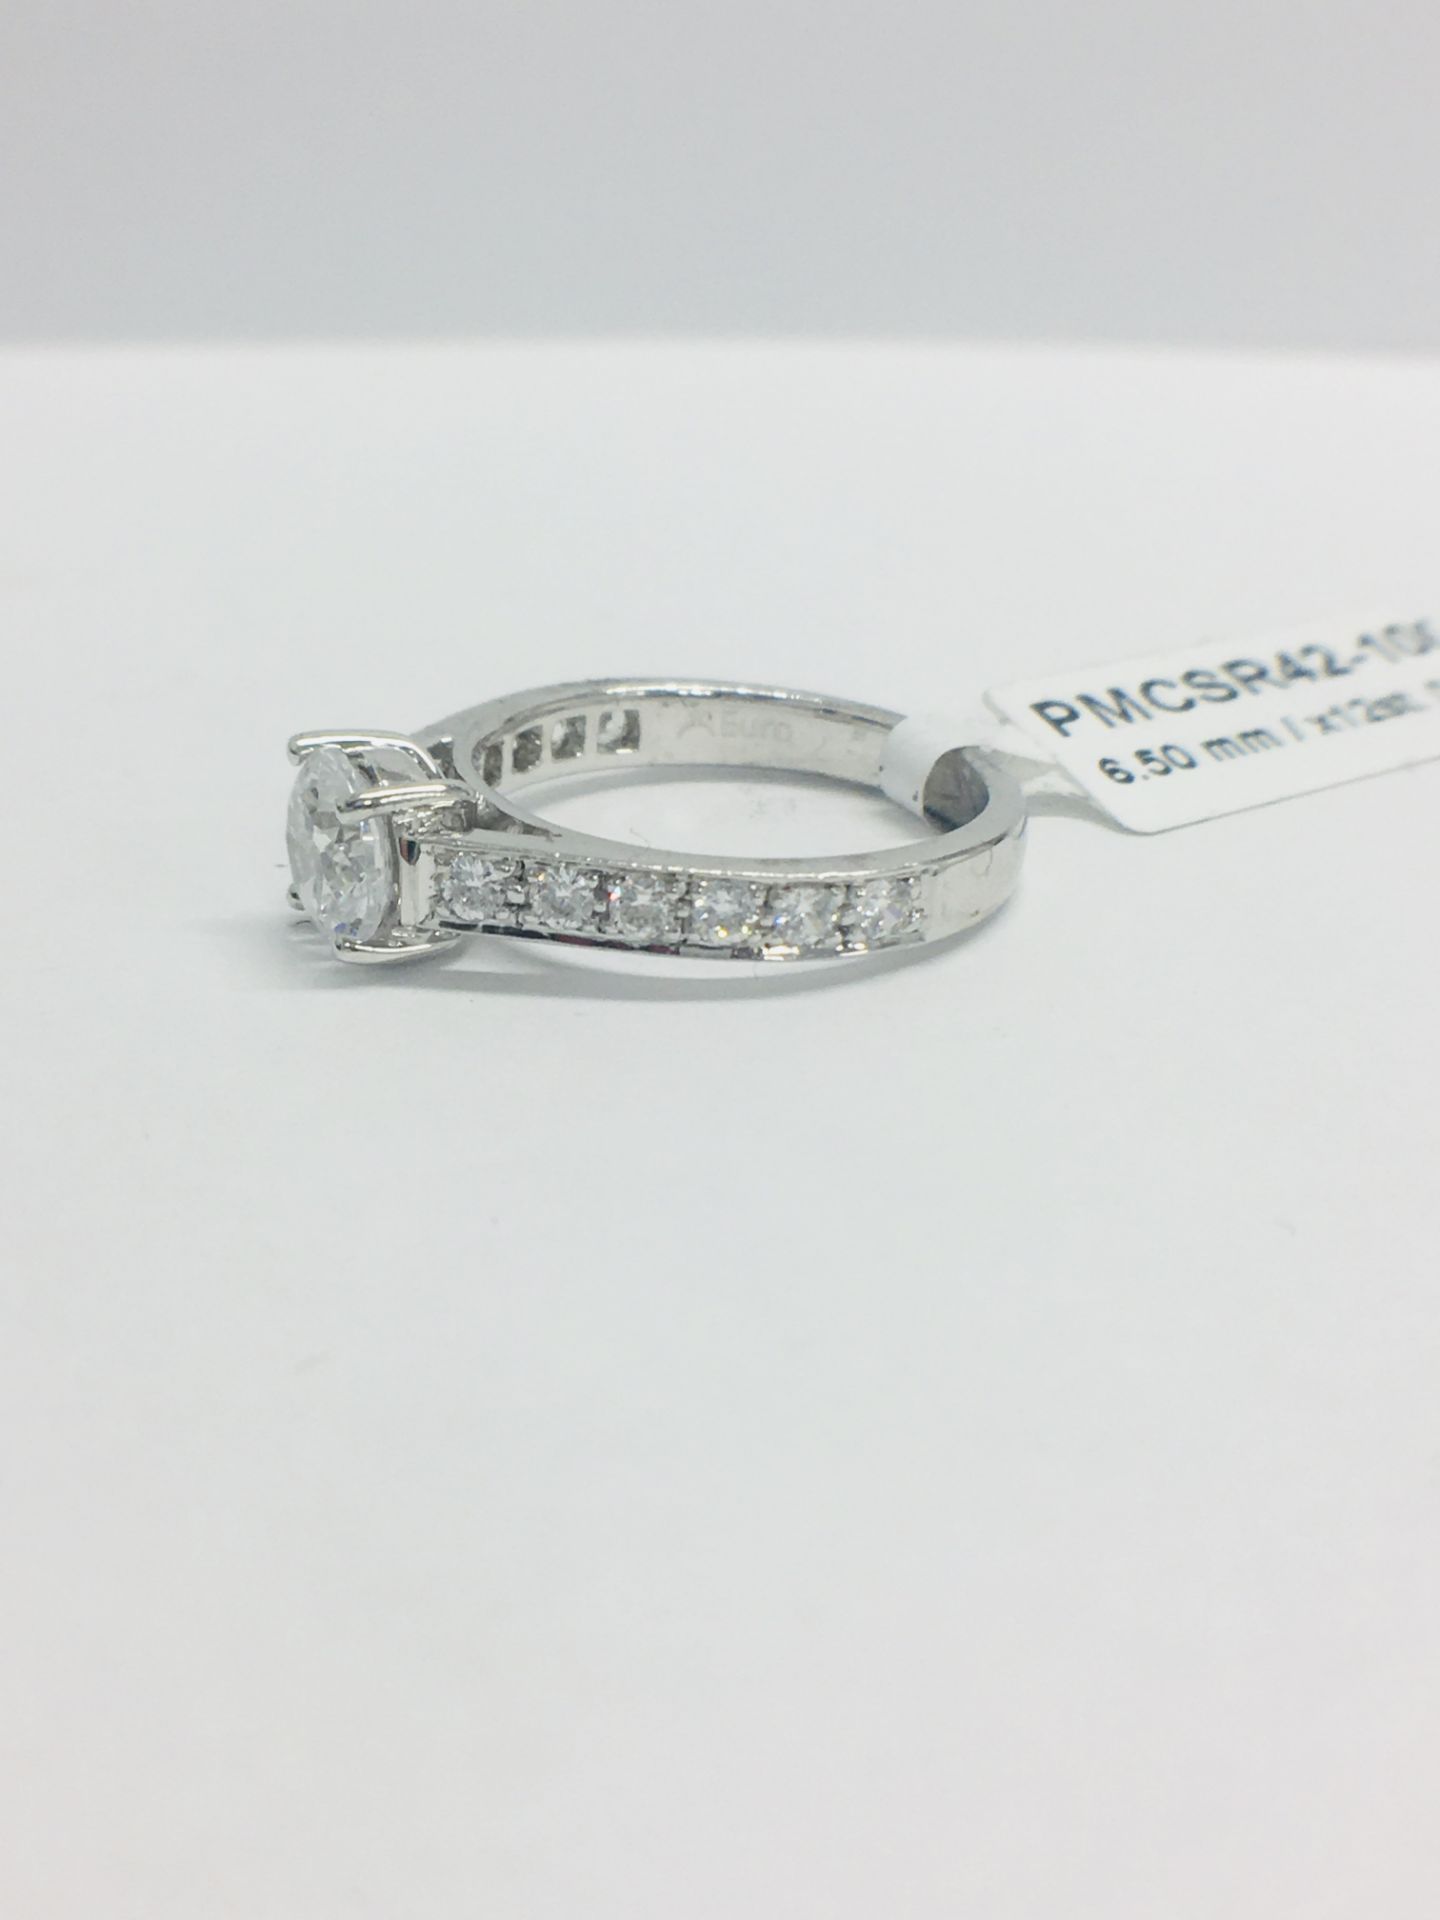 Platinum Diamond Solitaire Ring With Diamond Set Shoulders - Image 6 of 11